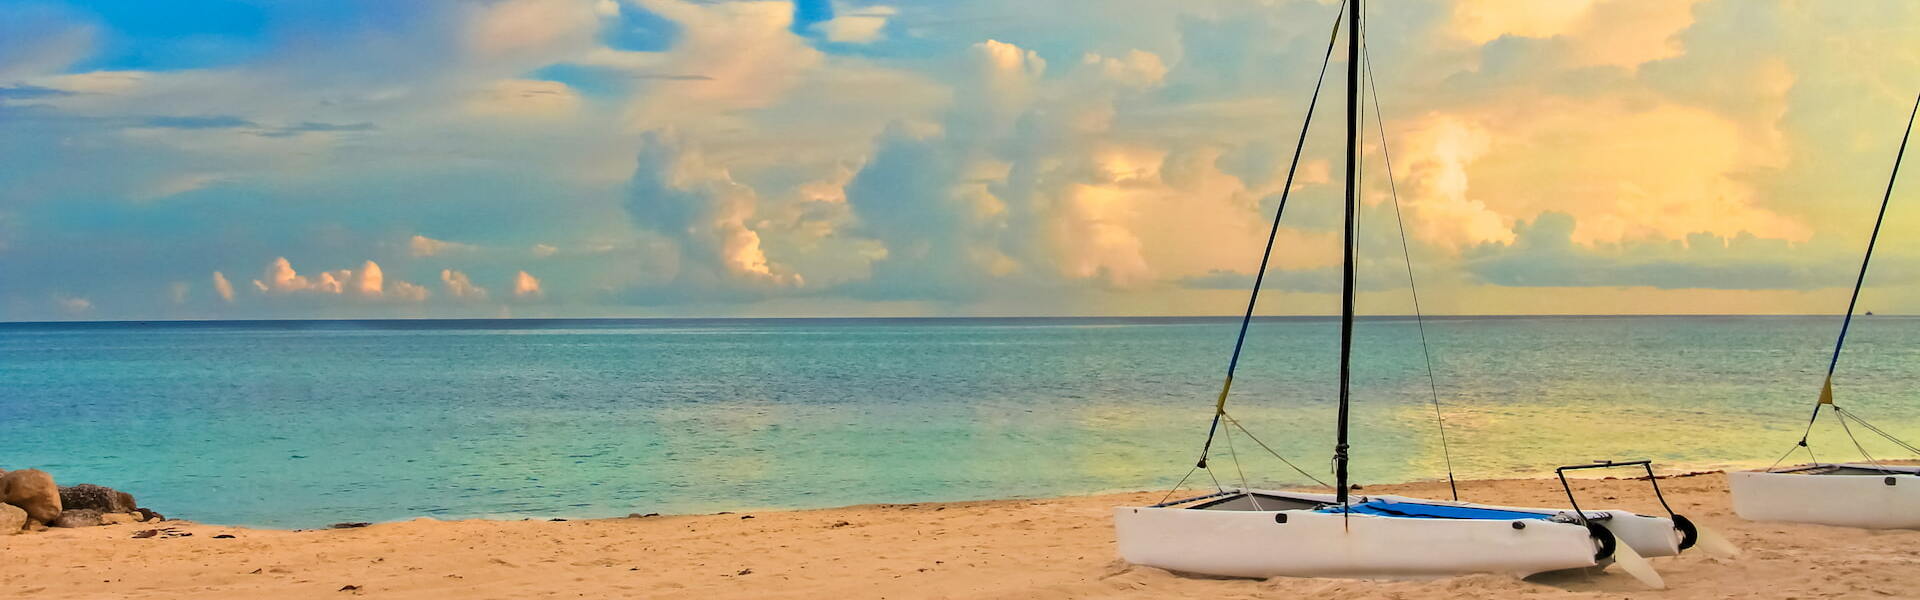 Beach view with sand and a boat on the shore of Freeport, Bahamas